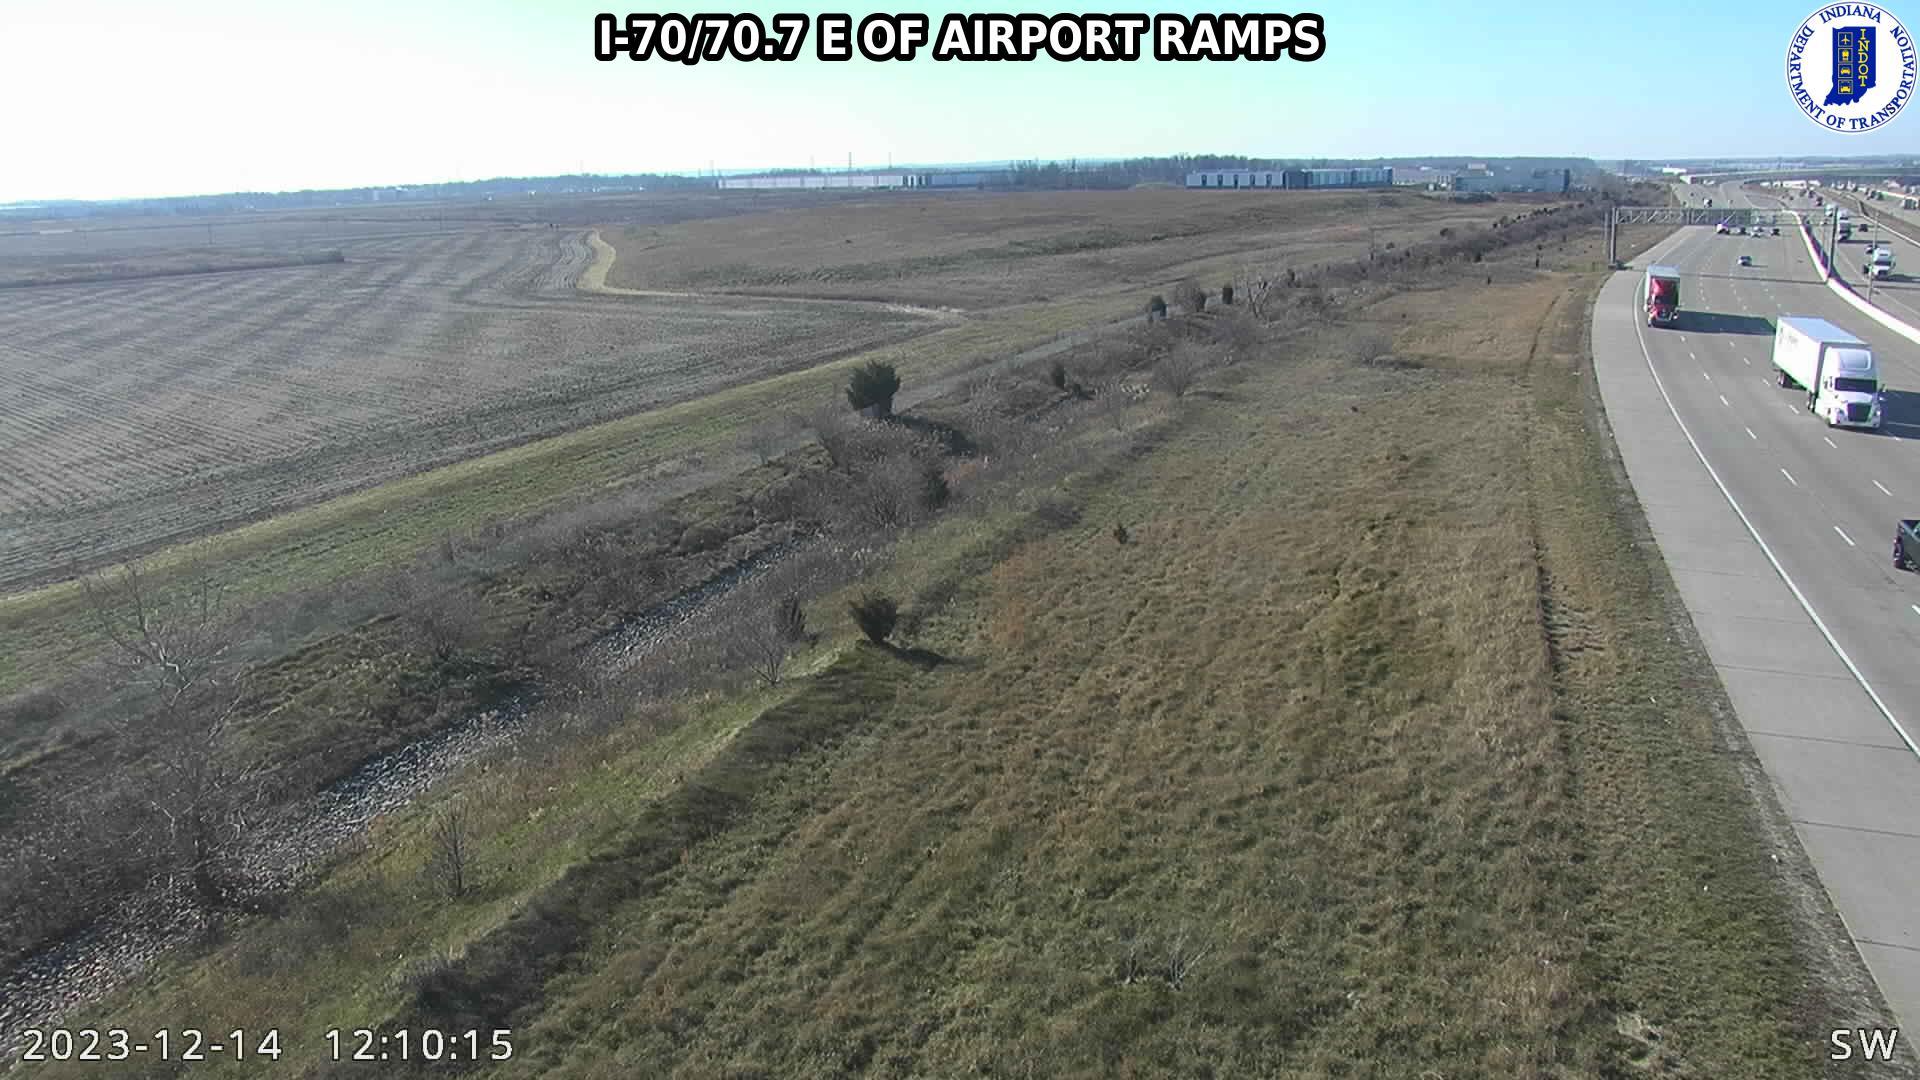 Traffic Cam Indianapolis: I-70: I-70/70.7 E OF AIRPORT RAMPS Player